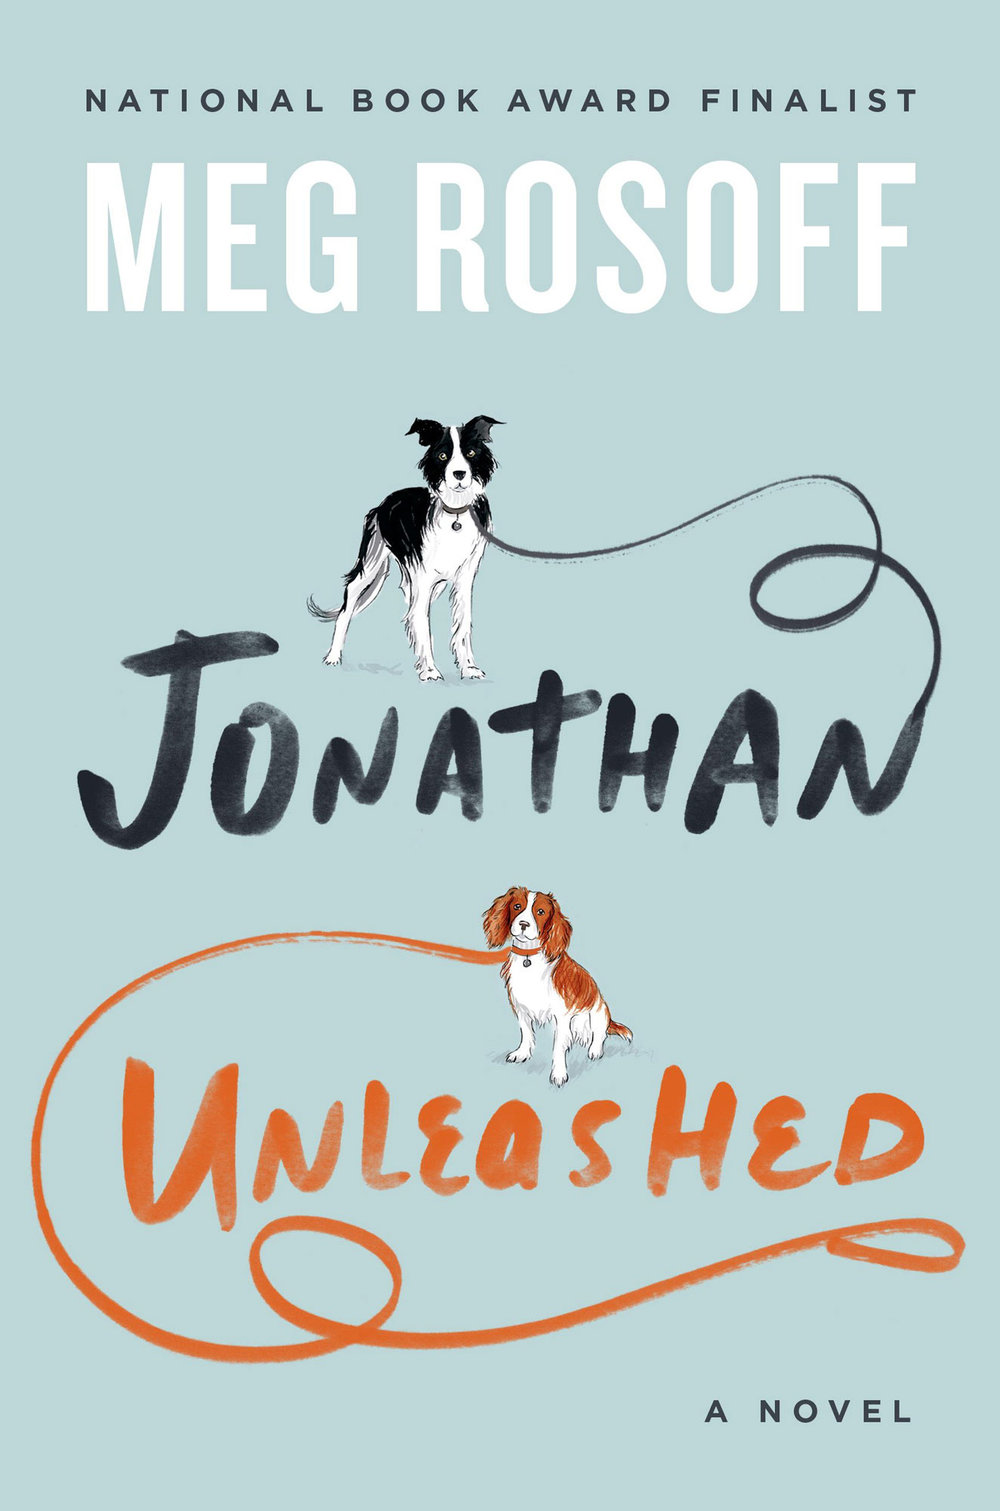 Image for "Jonathan Unleashed"